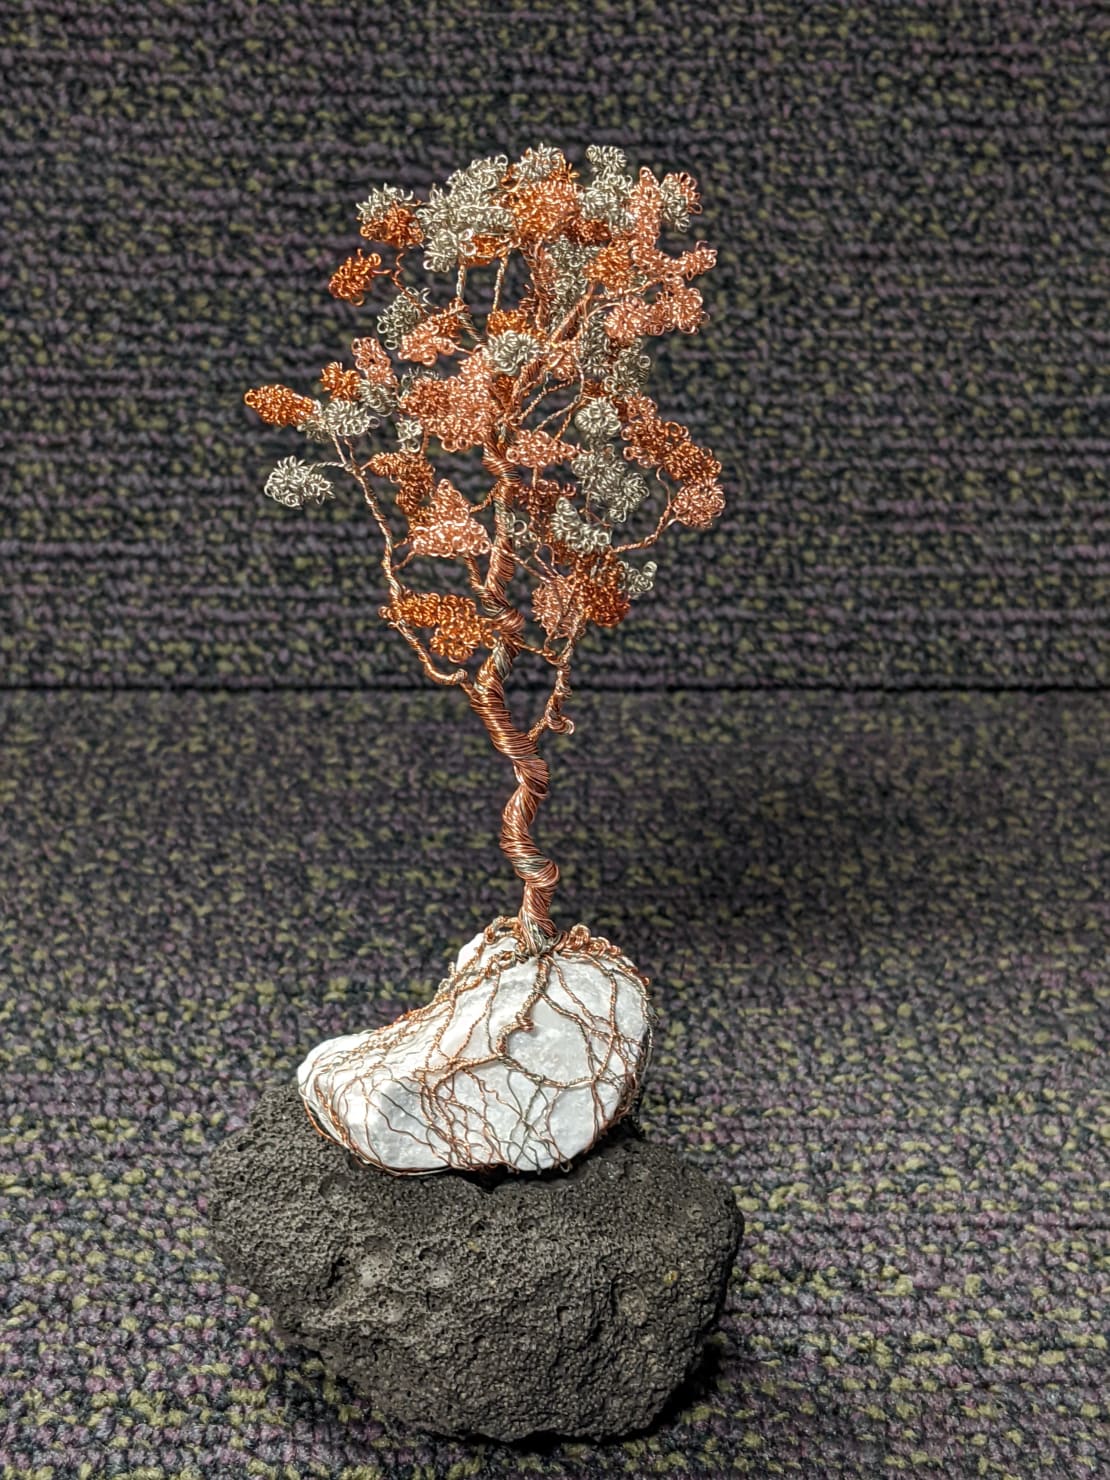 A tiny multicolored tree made with wire